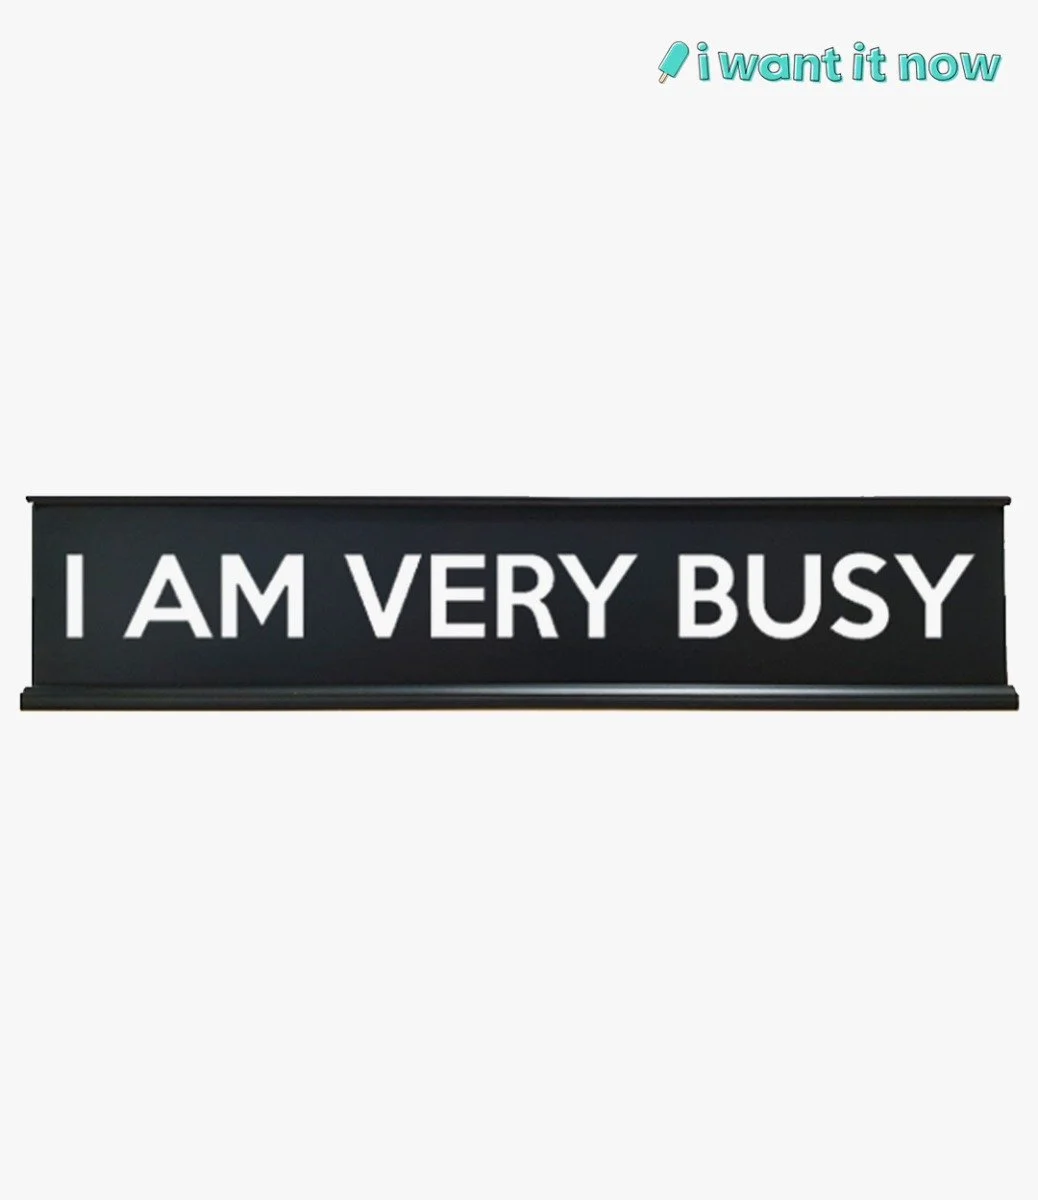 Desk Sign - I am very busy - By I Want It Now